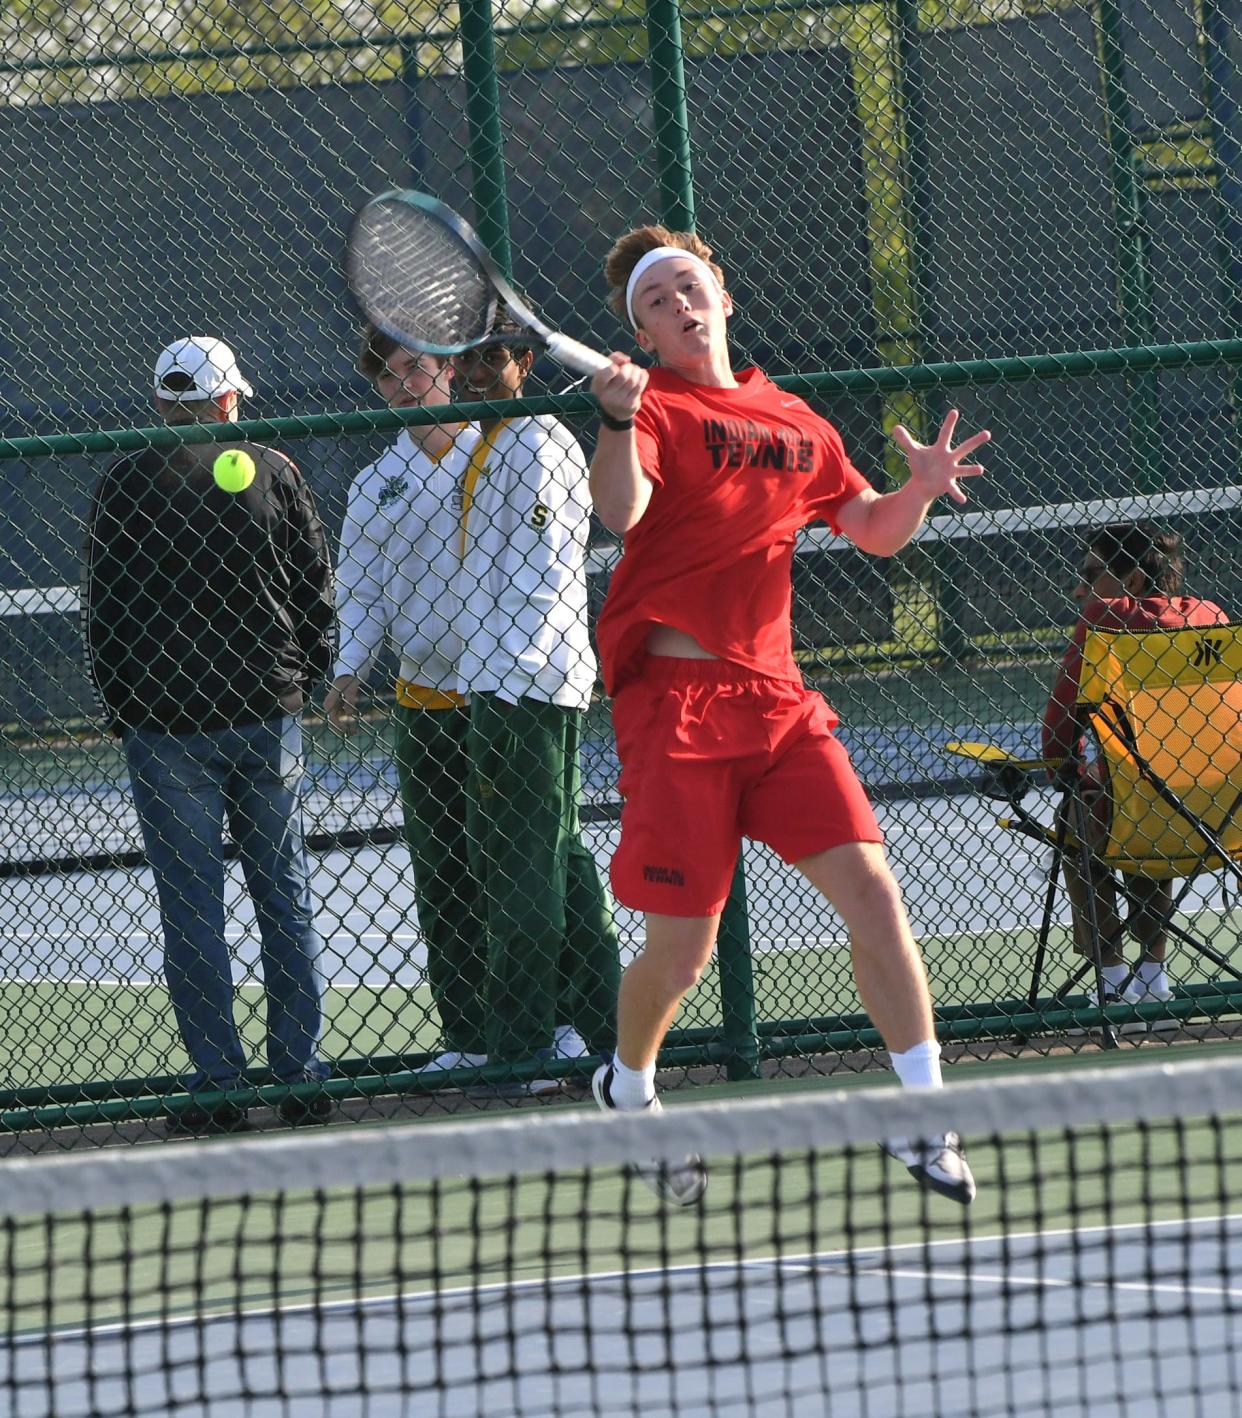 R.J. Poffenberger of Indian Hill makes a forehand return in the second singles at Flight A of the GCTCA Coaches Classic Tennis Tournament, Mason High School, April 27.